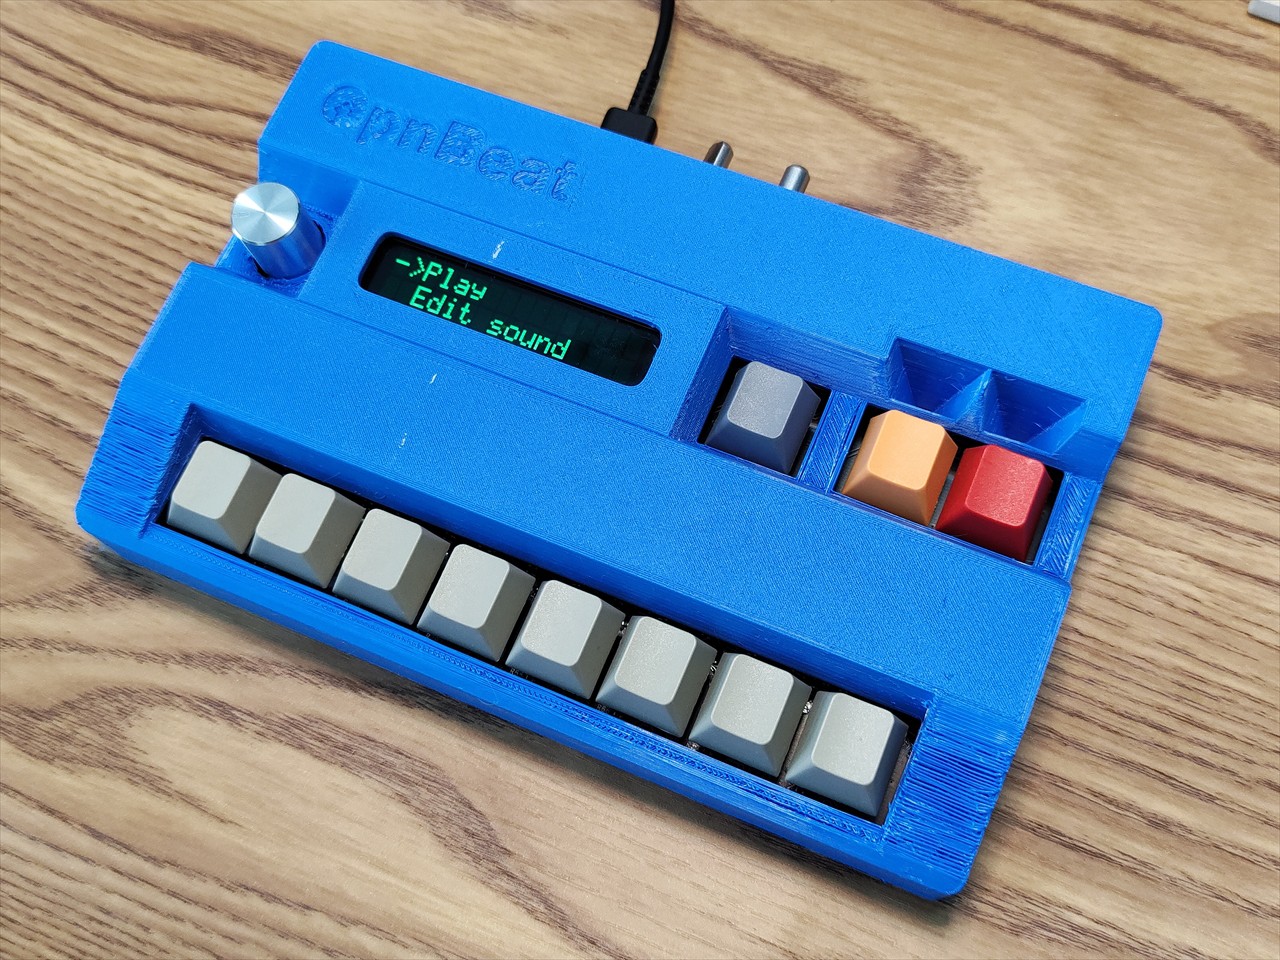 OpnBeat is a DIY lo-fi sampler anyone can learn to use